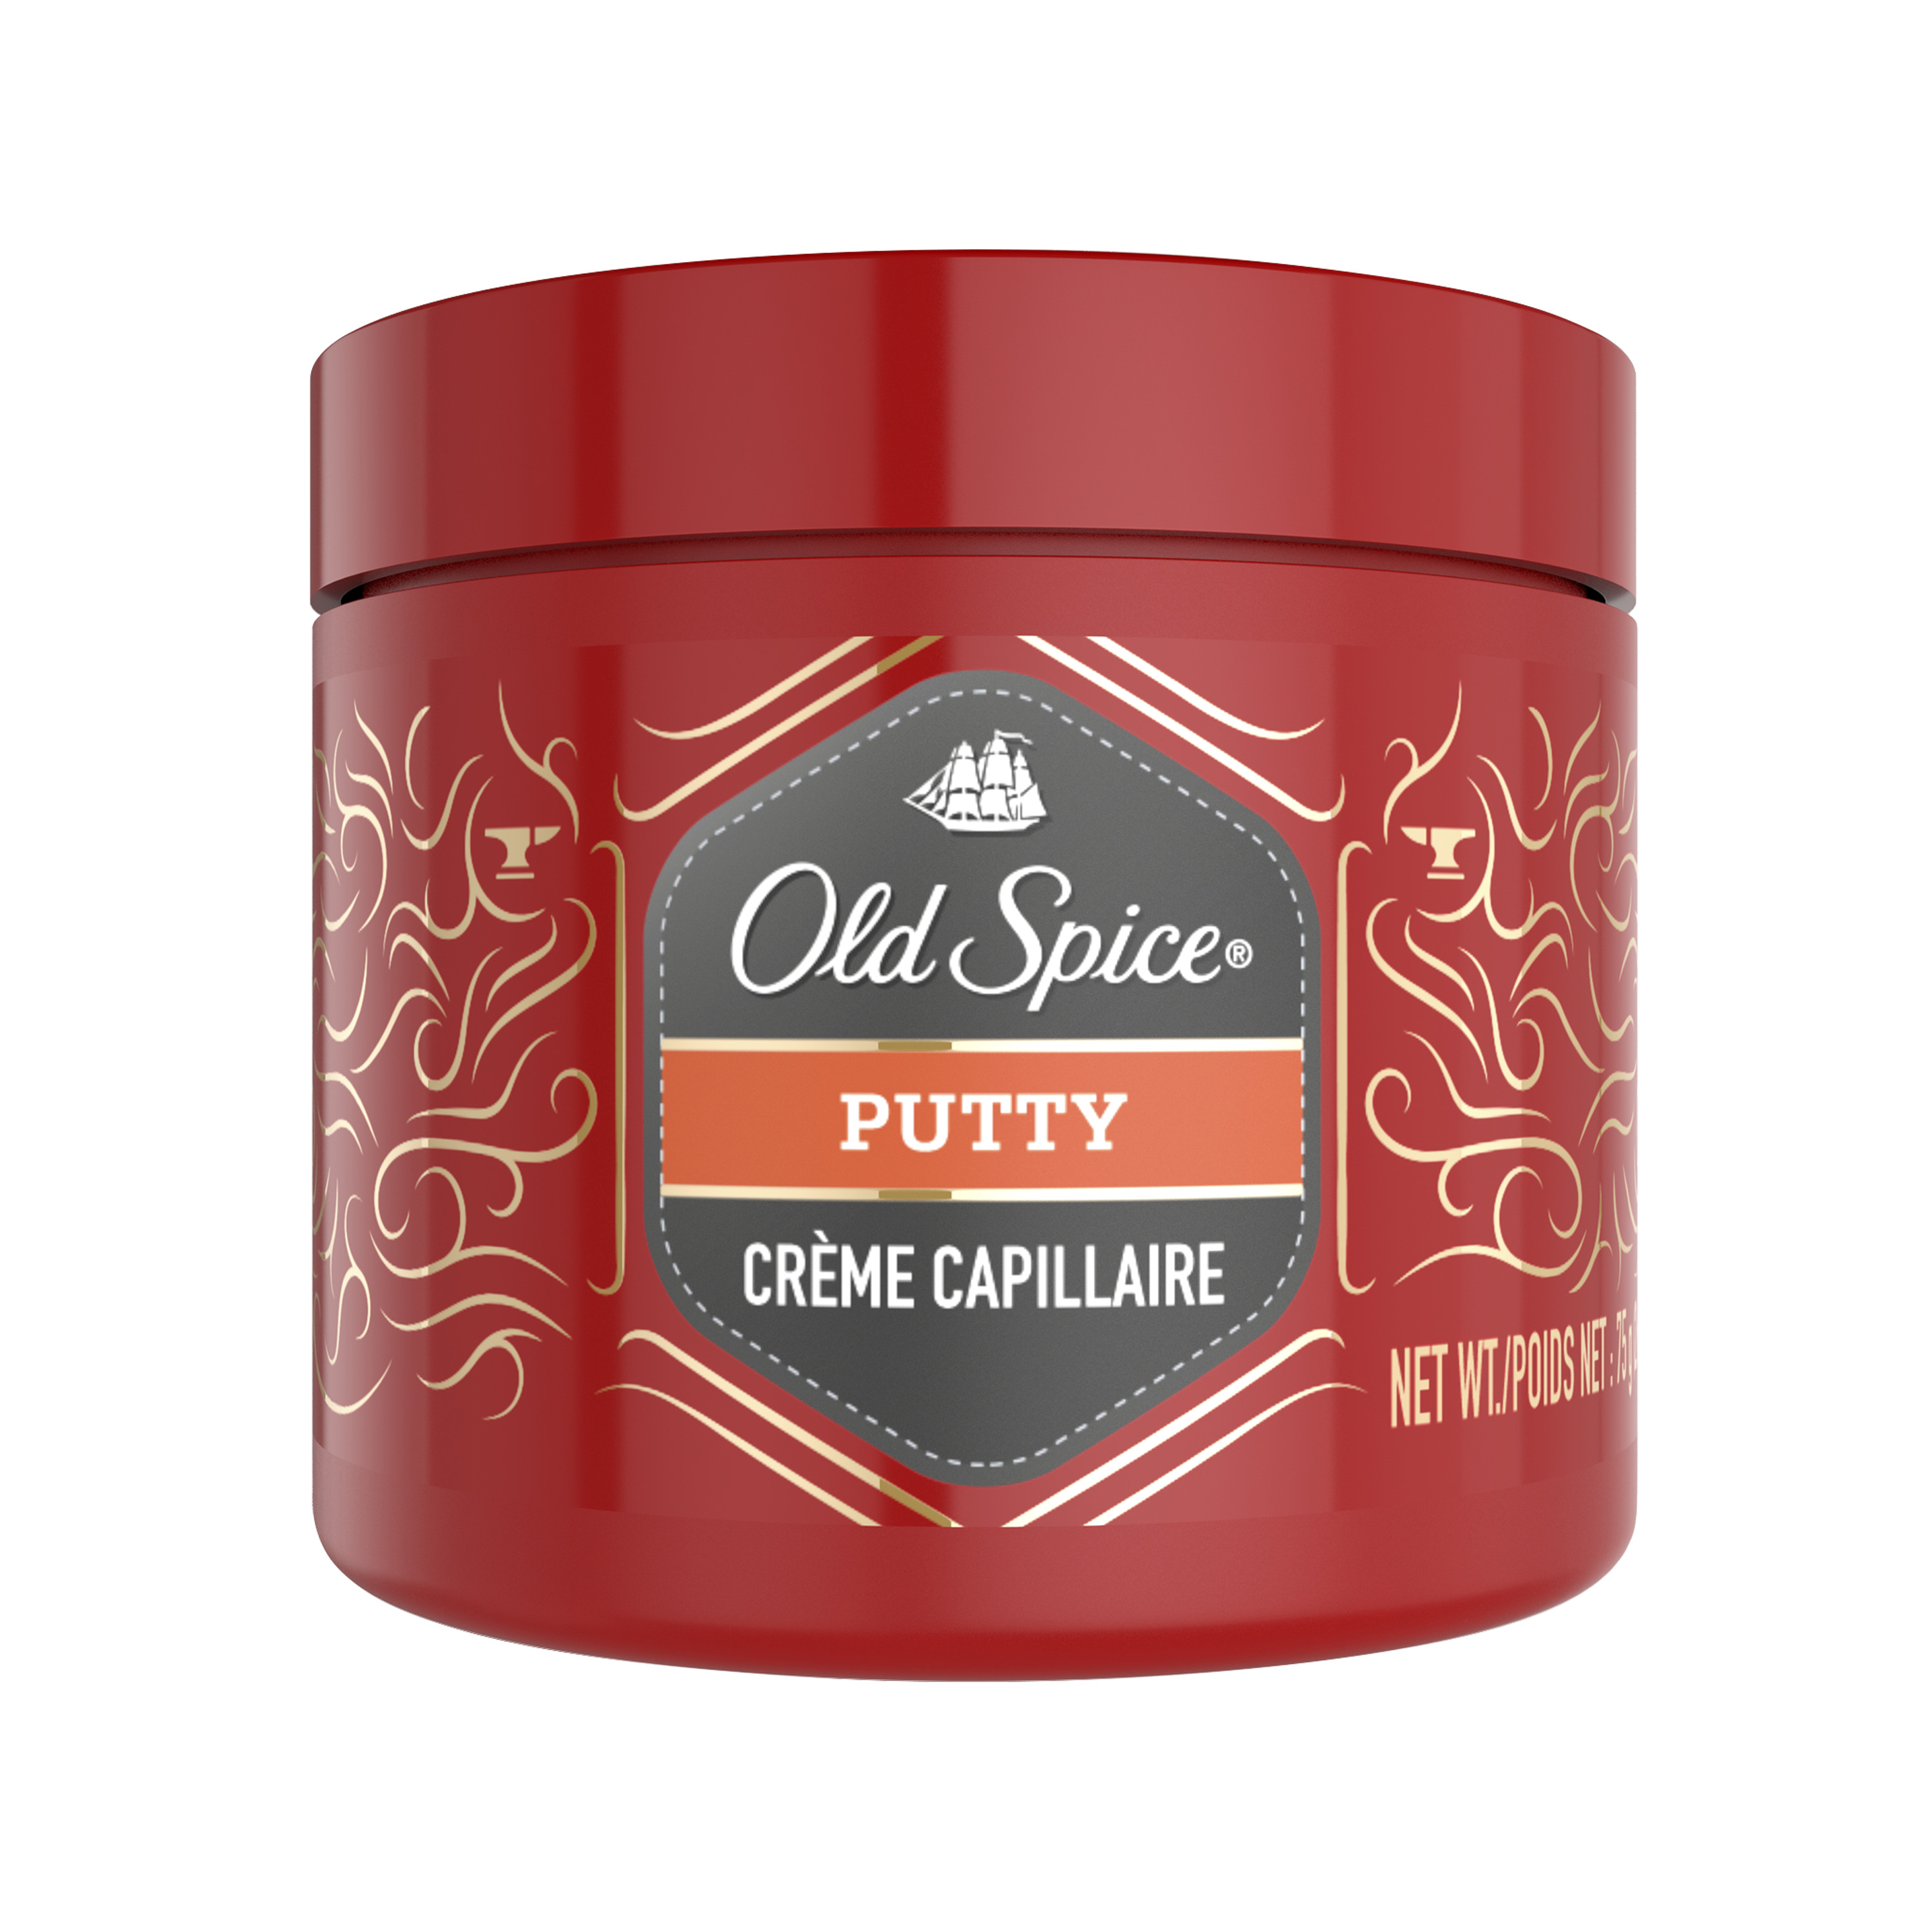    / Old Spice Forge Putty -     75 